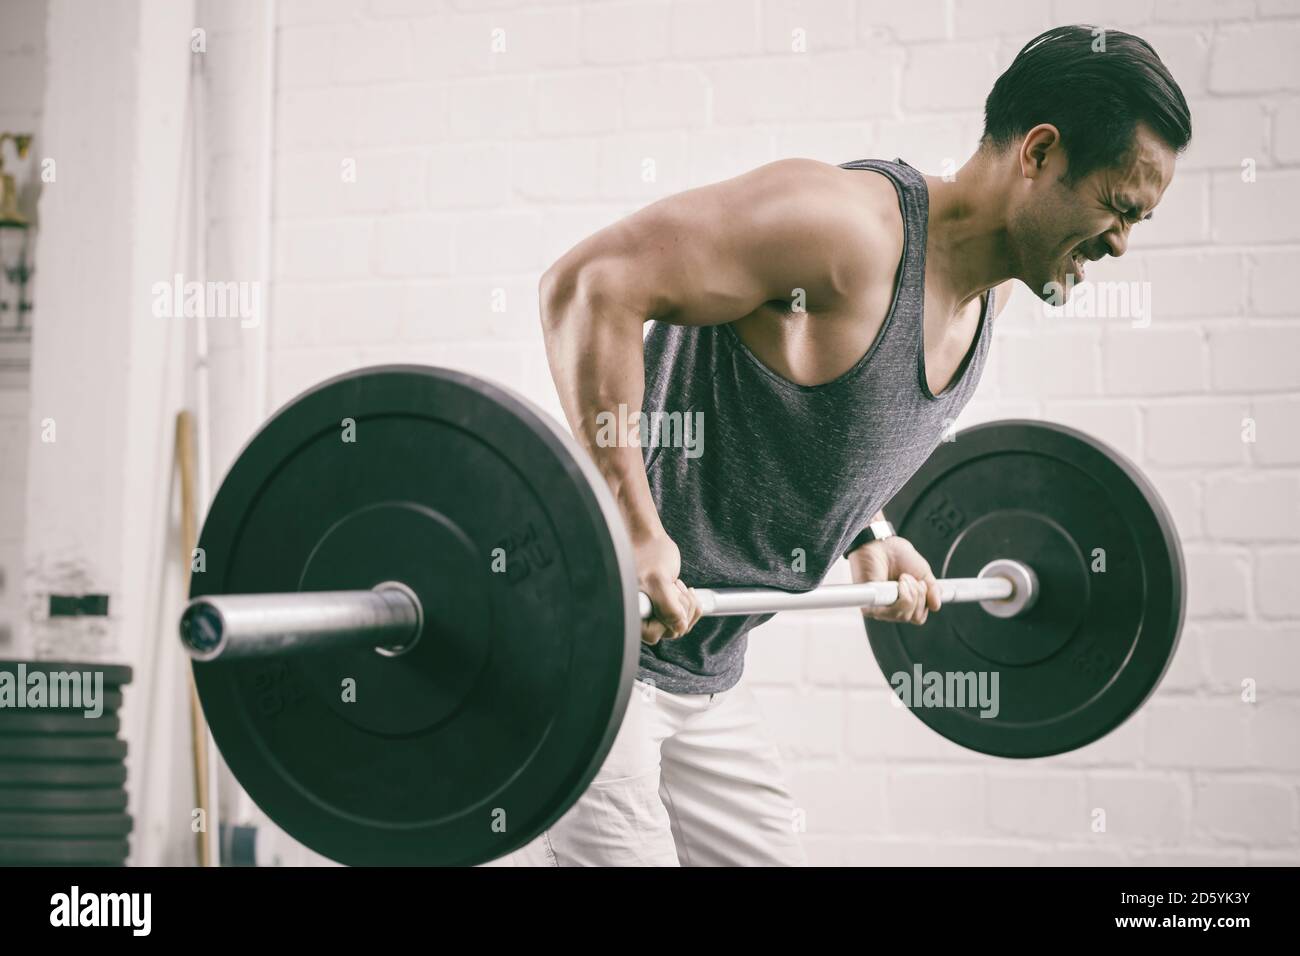 Man in gym lifting weights Stock Photo